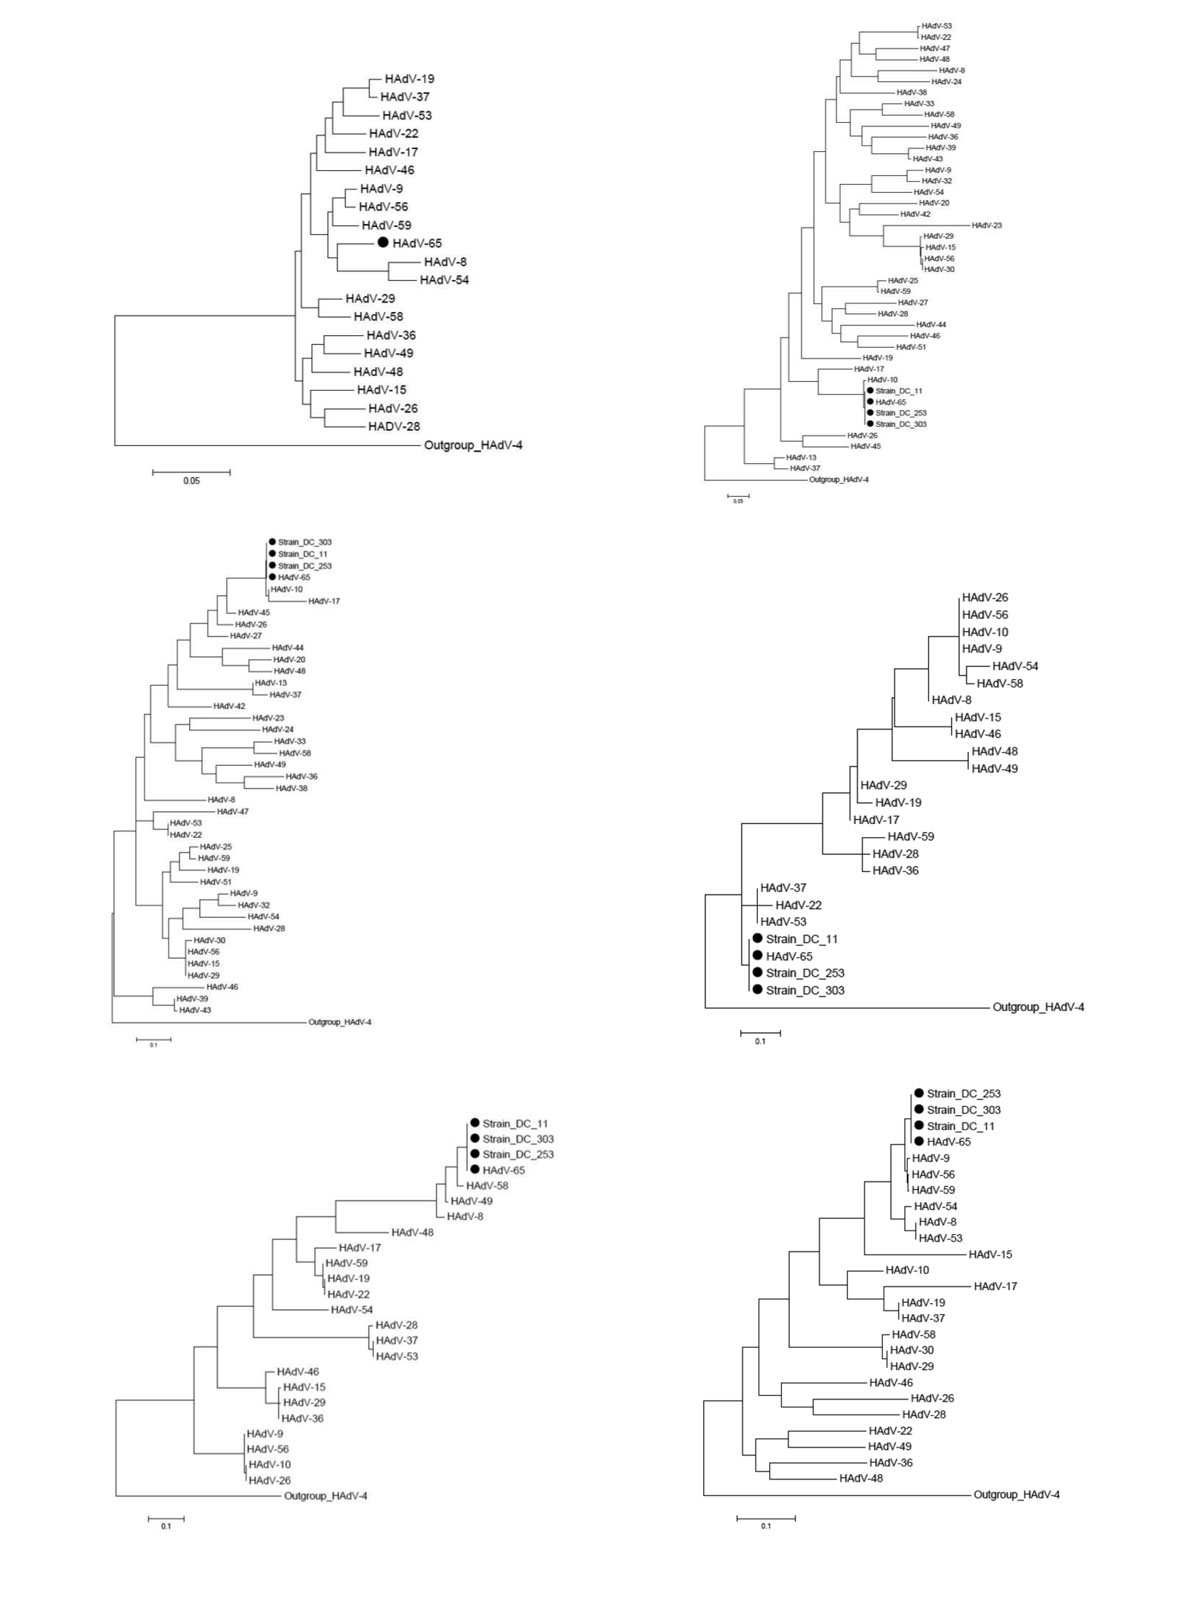 Phylogenetic trees of a novel human adenovirus (HAdV-65), 3 strains (DC 11, DC 253, and DC 303), and other HAdV-D reference strains. Full genome sequences (except for the 3 strains) (A), loop 1 (B) and loop 2 (C) sequences of hexon gene, hypervariable loop 1 of penton base gene (D), Arg-Gly-Asp (RGD) loop of penton base gene (E), and fiber gene (F). Black dots indicate new strains isolated in this study. Scale bars indicate nucleotide substitutions per site. Adenoviruses HAdV-8 (DQ149614, AB4487